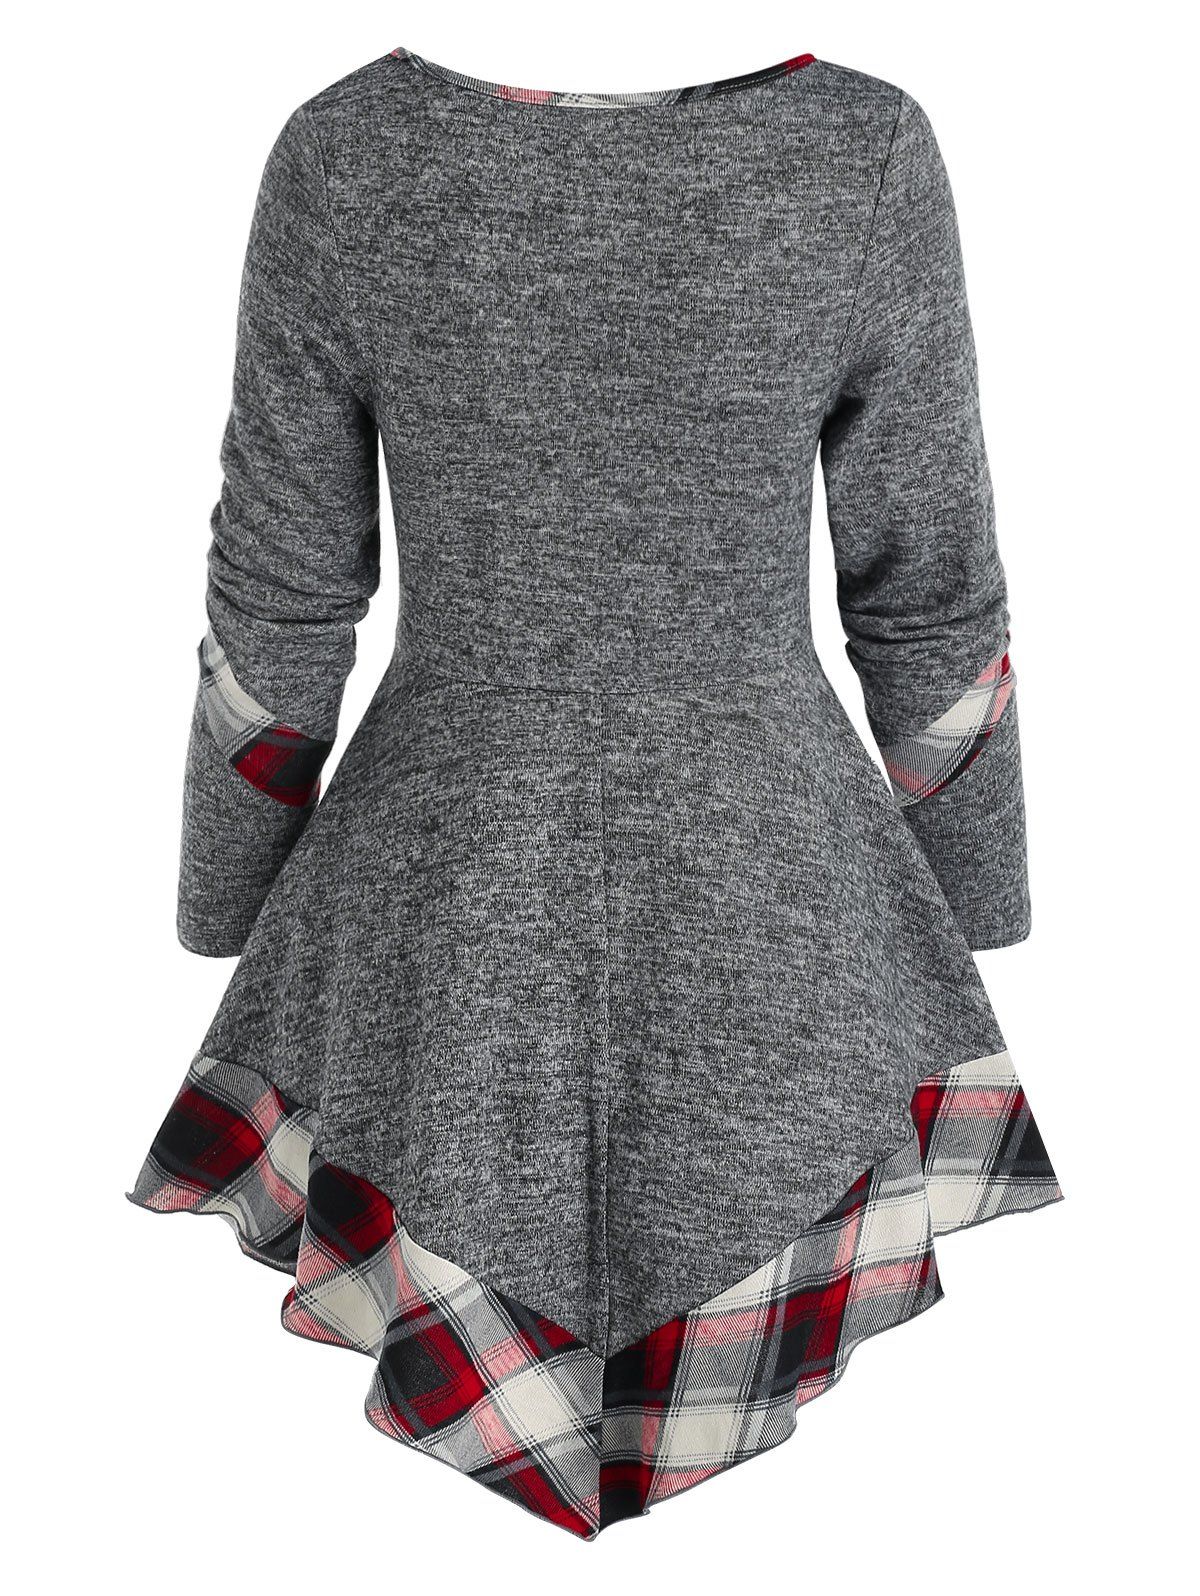 [26% OFF] 2021 Twist Front Plaid Pointed Hem Sweater In GRAY | DressLily